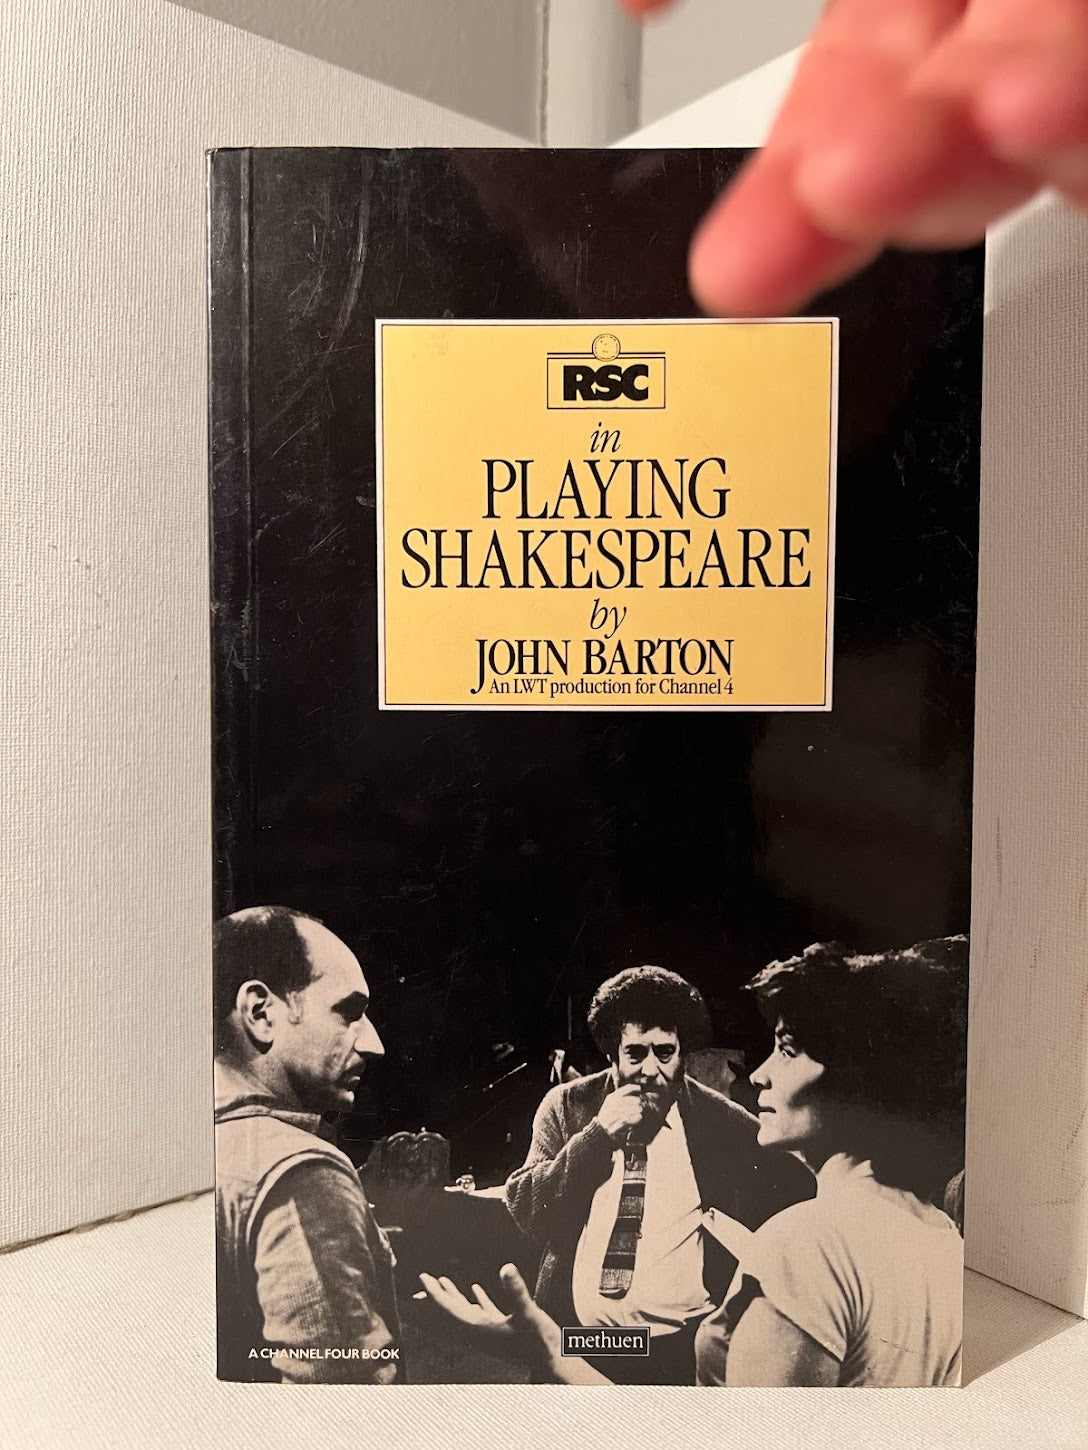 RSC in Playing Shakespeare by John Barton